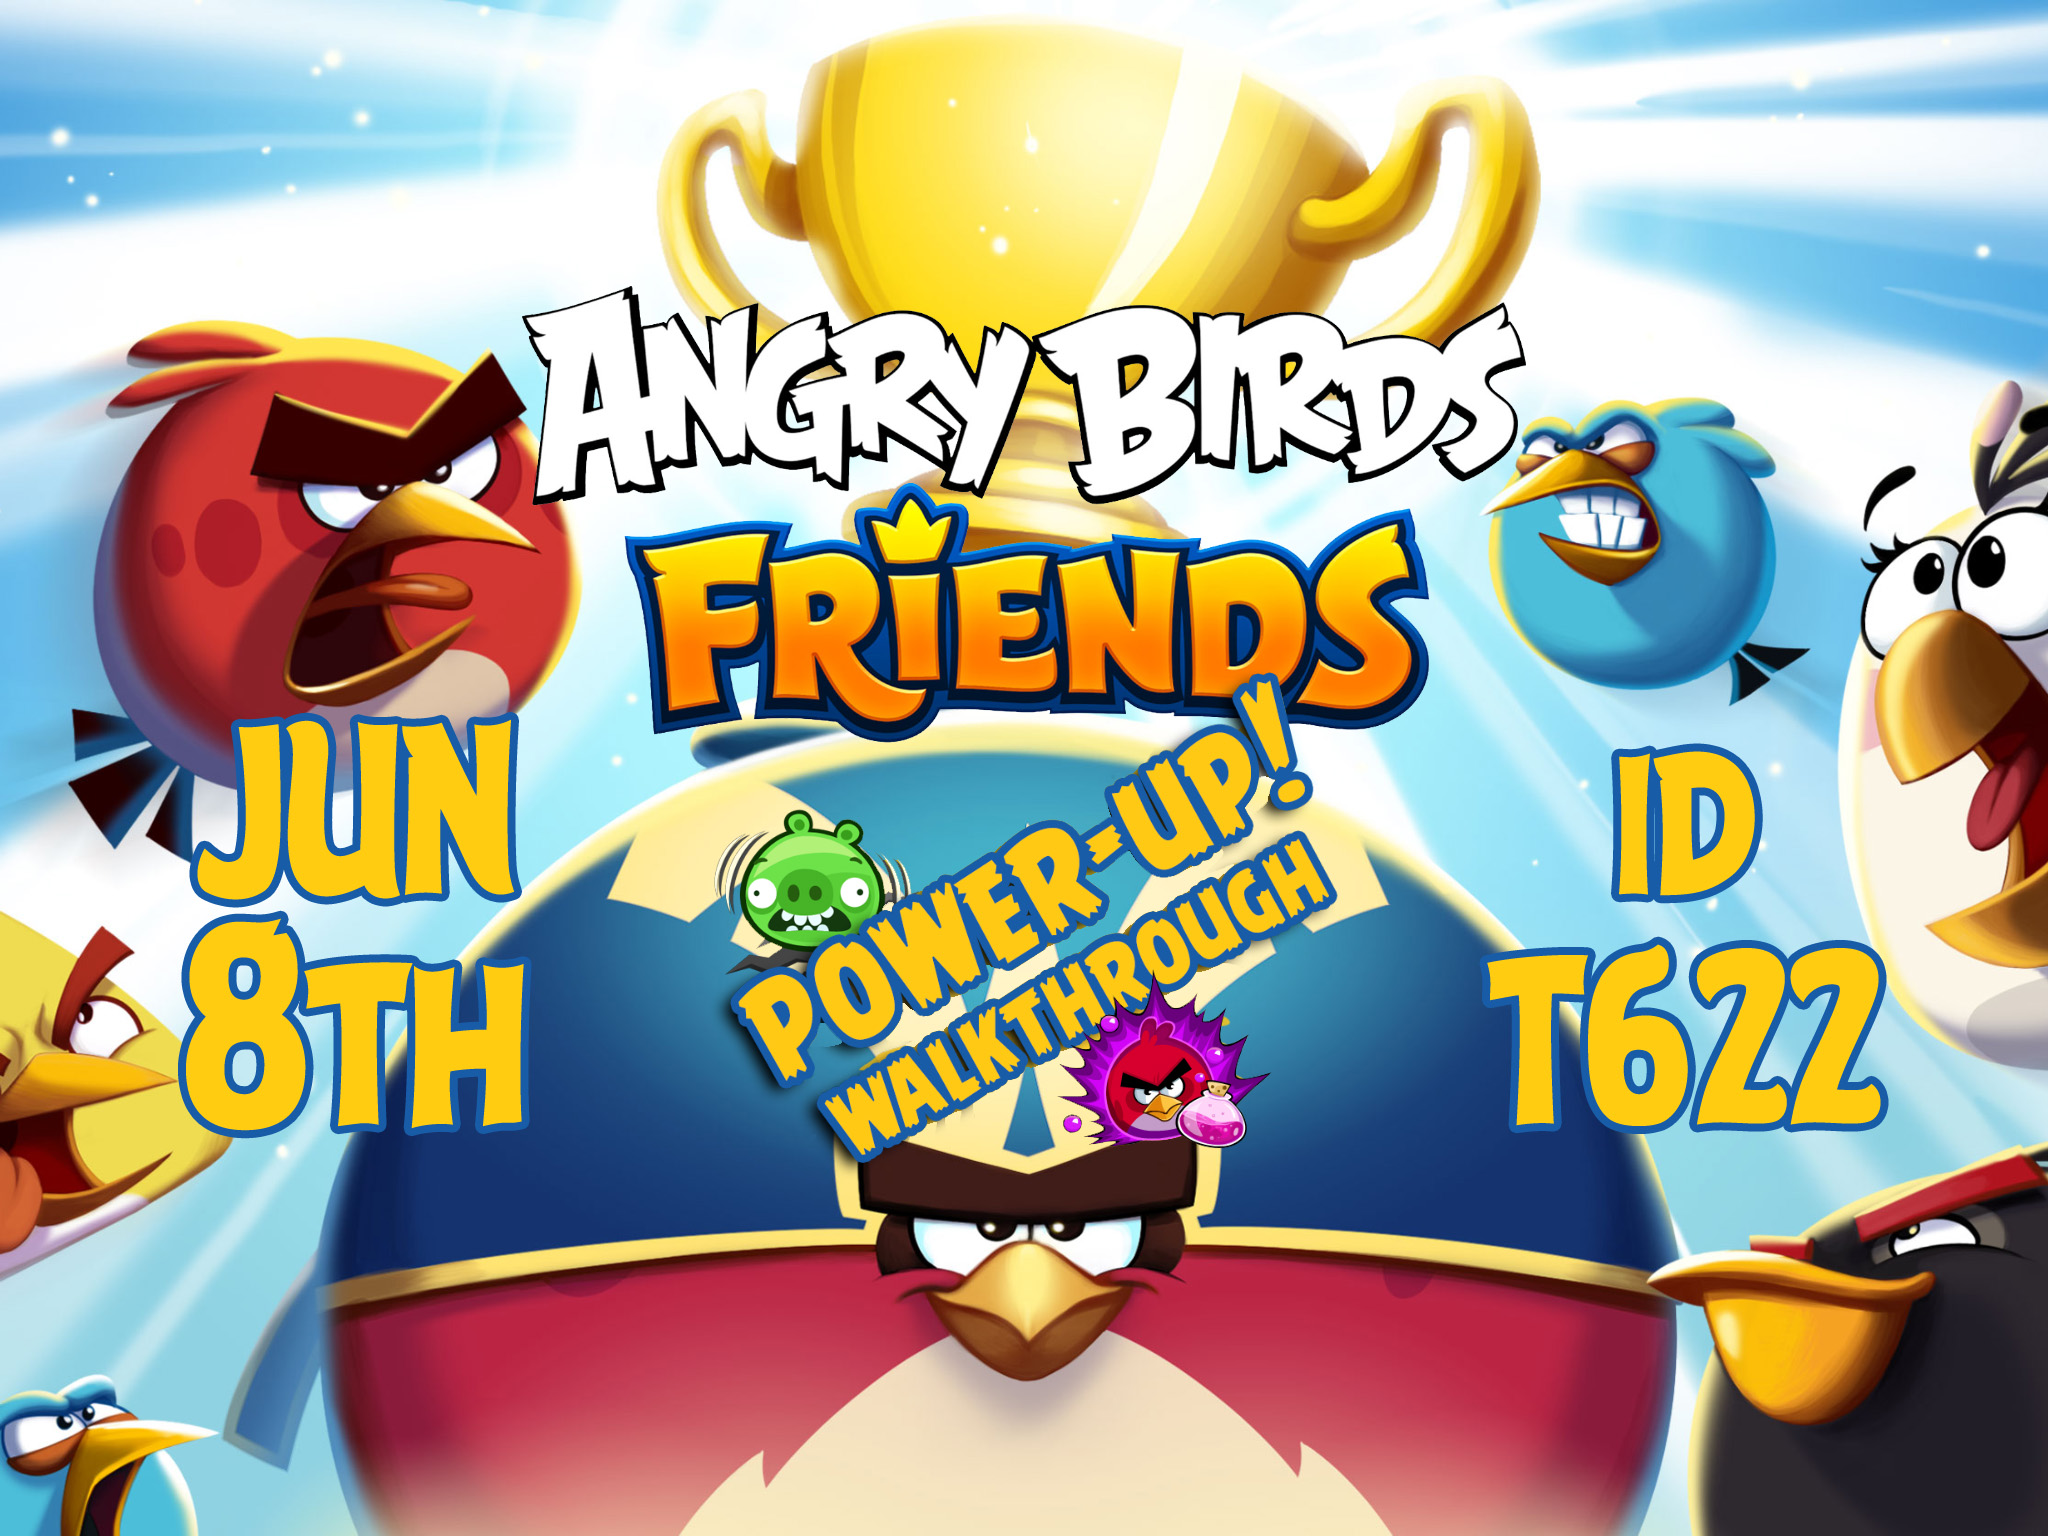 Angry-Birds-Friends-Tournament-T622-Feature-Image-PU